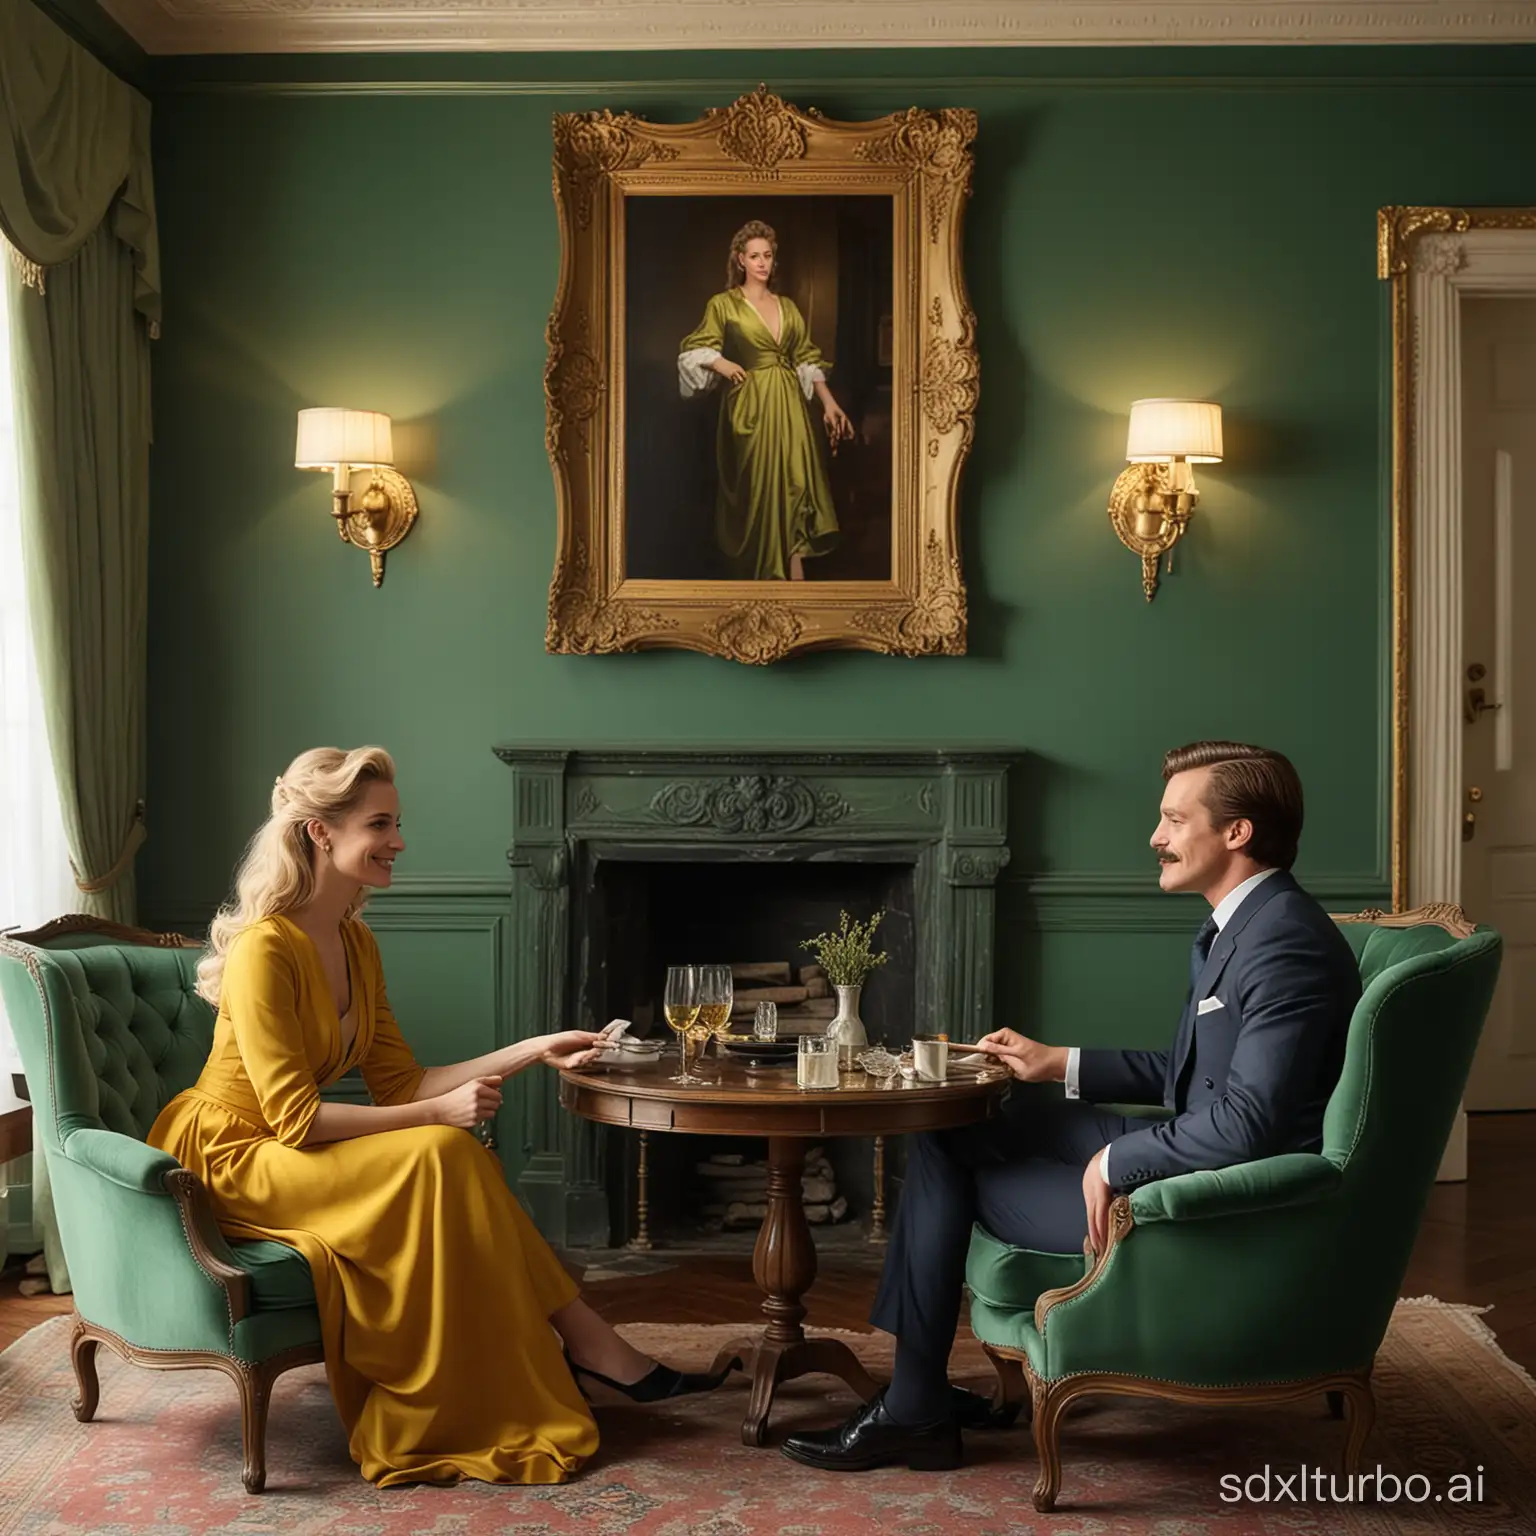 Visualize a sophisticated, intimate setting in a vintage living room. At the center, a man and a woman with blond hair sit opposite each other on plush emerald green upholstered armchairs. The man, positioned on the left, sports a neatly trimmed mustache and is dressed in a sharply tailored navy-blue suit with a white shirt and dark tie. He is holding a stemmed glass, sharing an amused glance with the woman. On the right, the woman is dressed in a flowing golden-yellow gown with long, elegant sleeves. Her hair is styled in an intricate updo. She too is holding a stemmed glass and smiles back at the man. A small glass table stands between them, upon which rests a silver ashtray. The setting is completed by soft green walls with period molding, a dark-framed portrait of a woman hanging on the wall, and a torch-shaped wall sconce. The room is filled with soft lighting, suggesting a peaceful afternoon ambiance.  The woman have to be on the right sit and the man on the left laughing